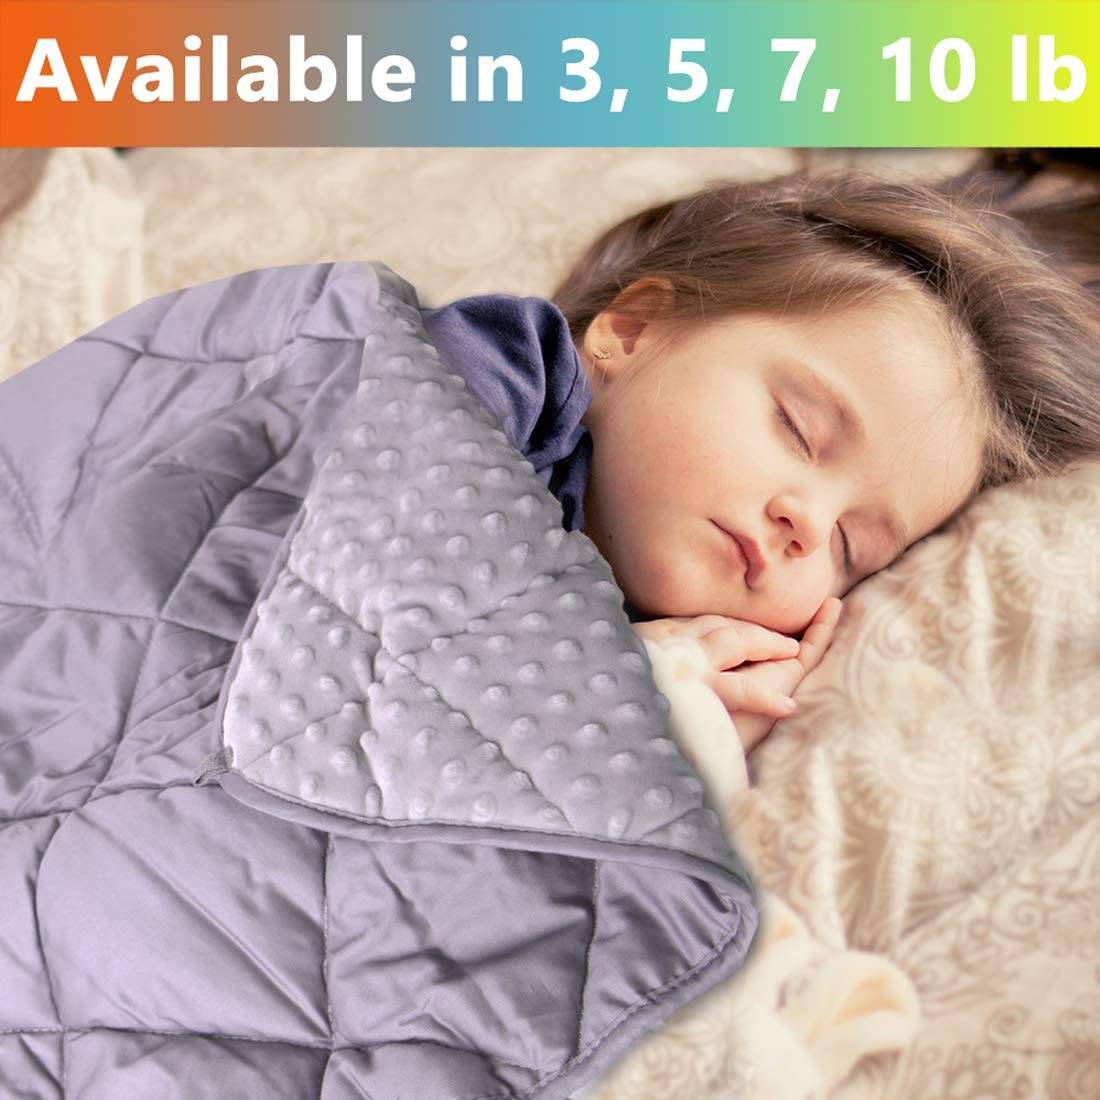 Best for 20-40lb Kids Breathable Cotton Heavy Blanket with Nontoxic Glass Beads Mr 36 x 48 Baby Lemon Sandman Weighted Blanket for Toddler 3 Pounds Washable